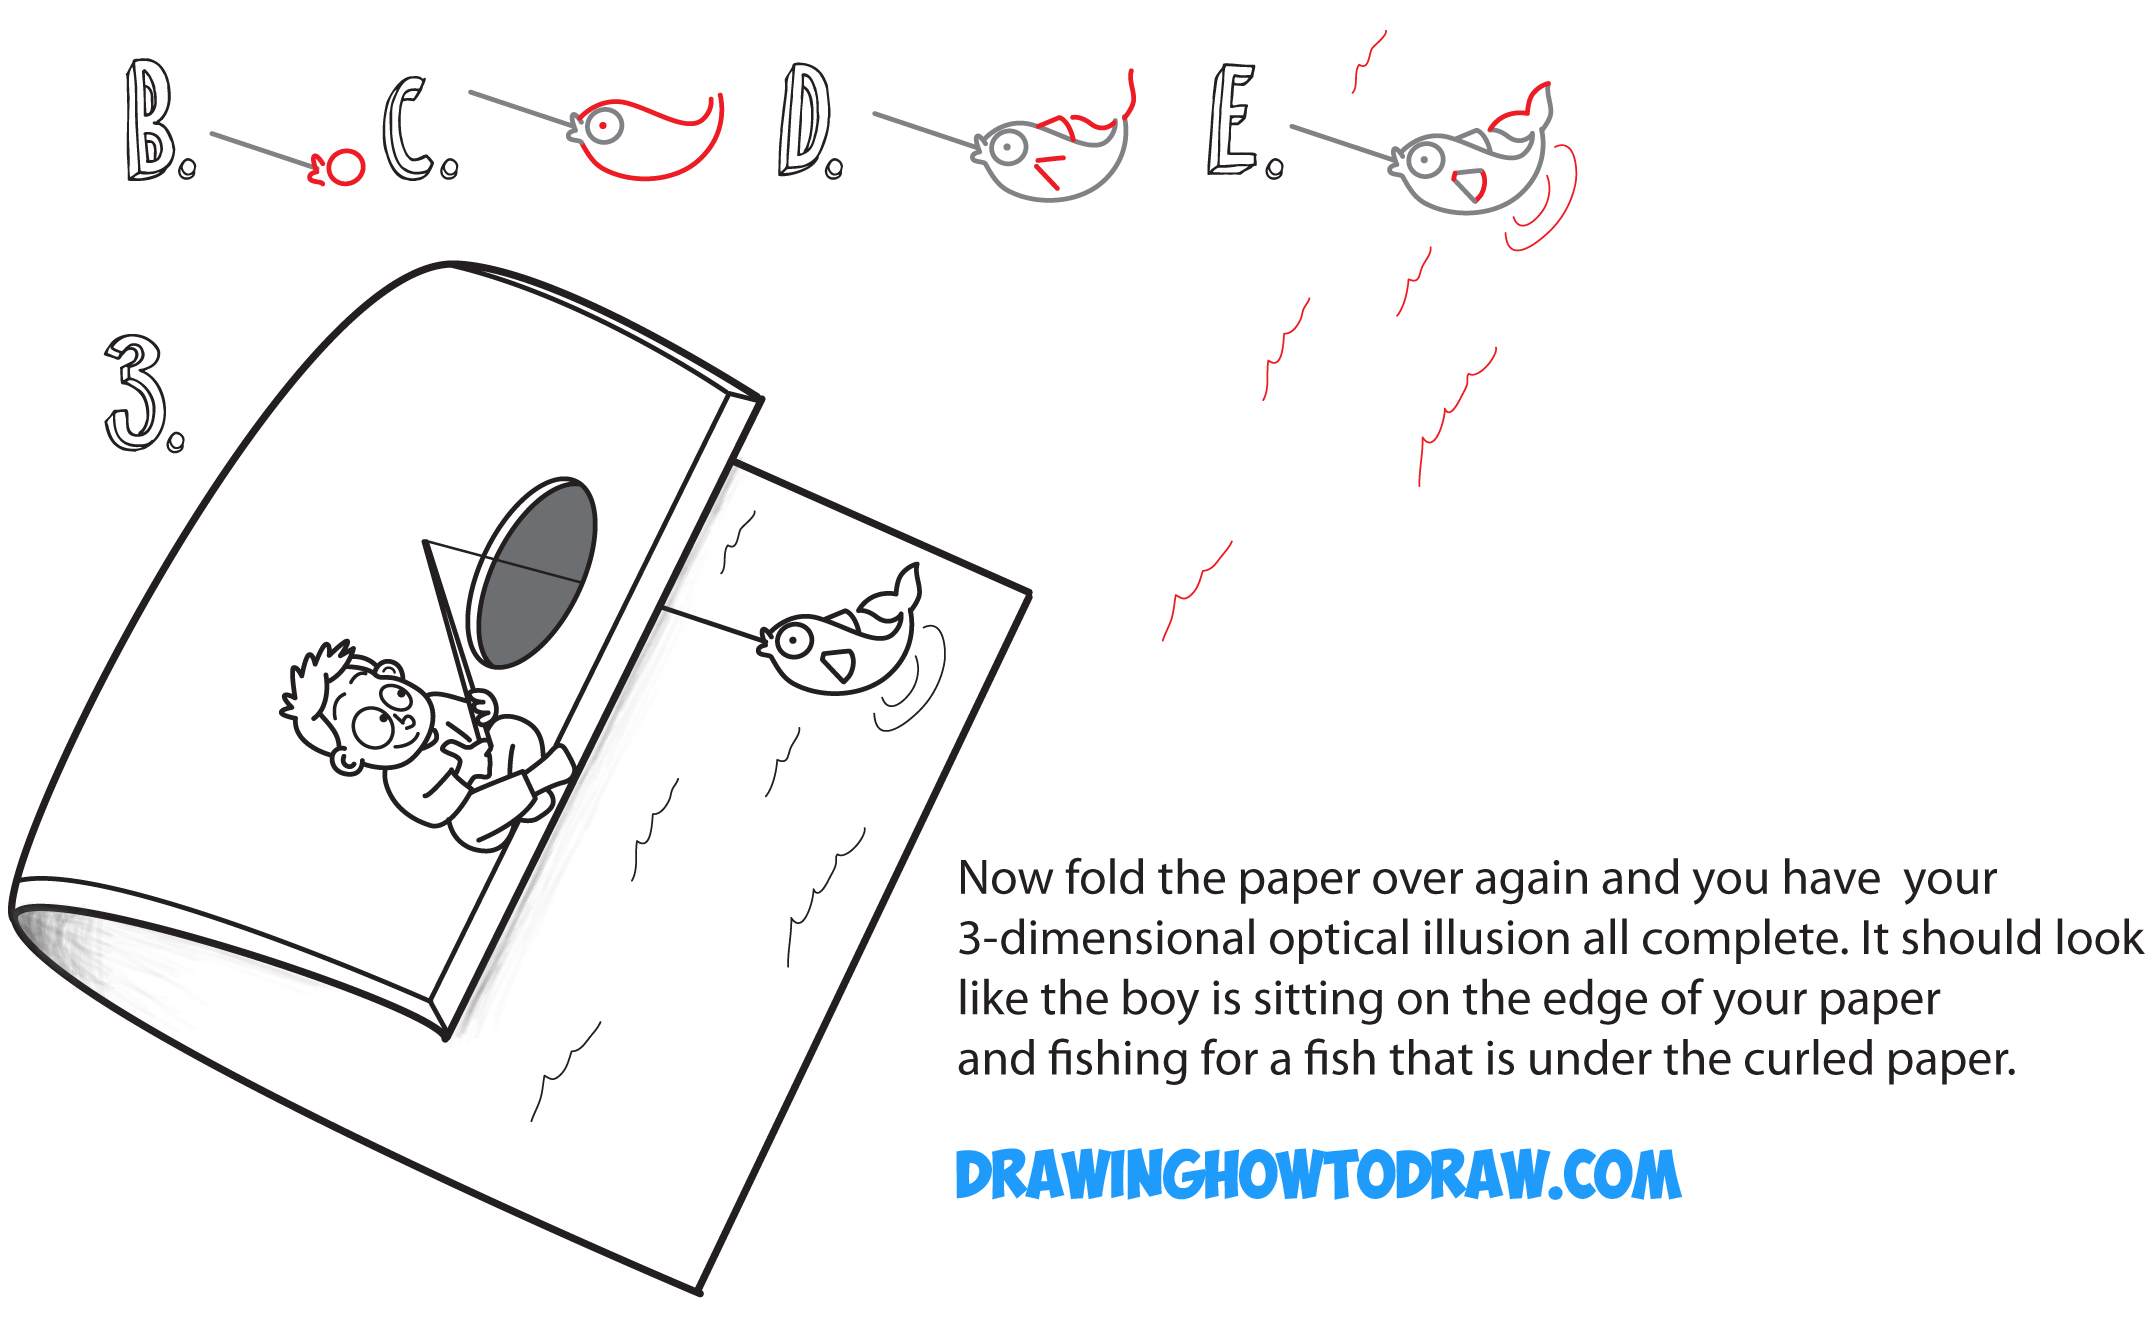 Learn How to Draw Cartoon Boy Fishing on Dock - Optical Illusion with Folded Over Paper - Simple Steps Drawing Lesson for Children & Beginners